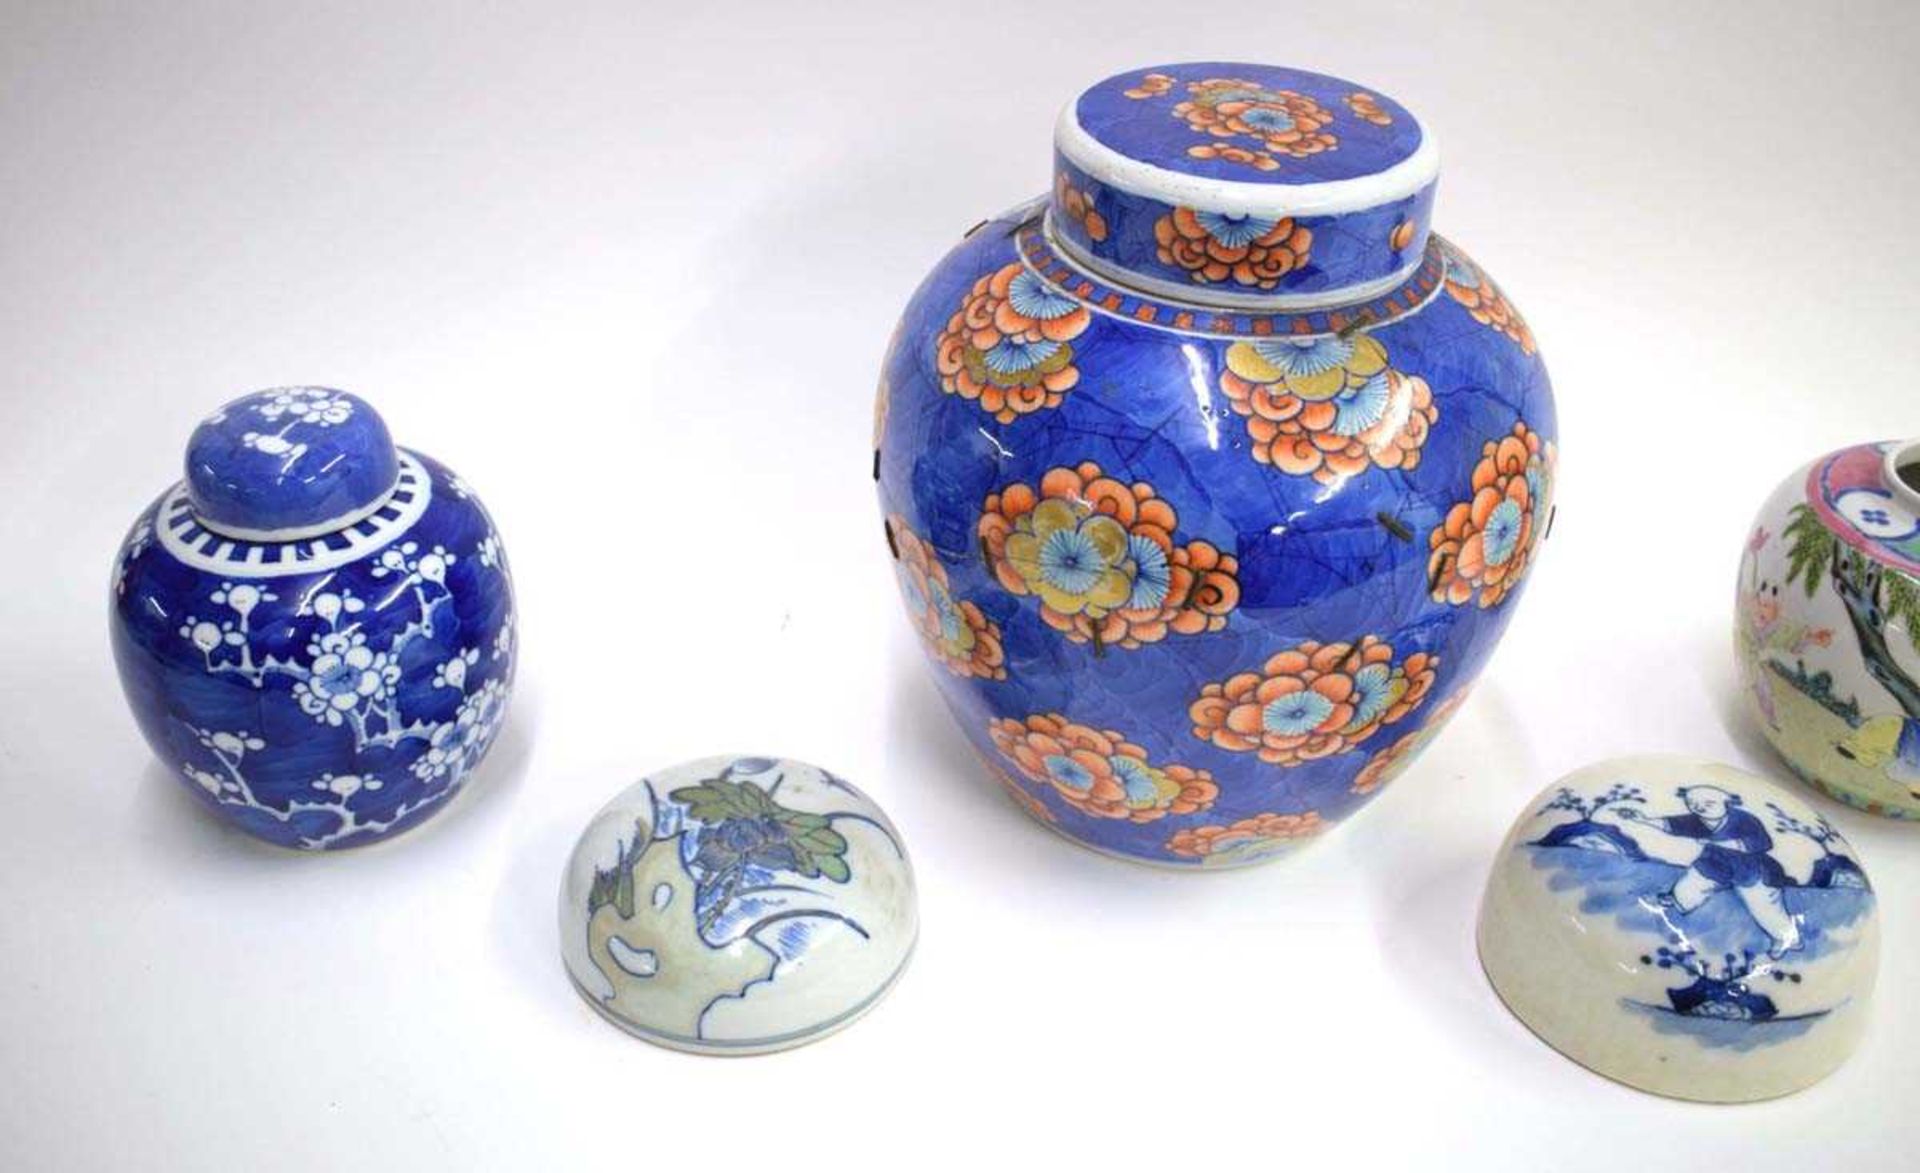 Thirteen Chinese ginger jars of typical form including a provincial example, h. 15 cm, blue and - Image 8 of 23